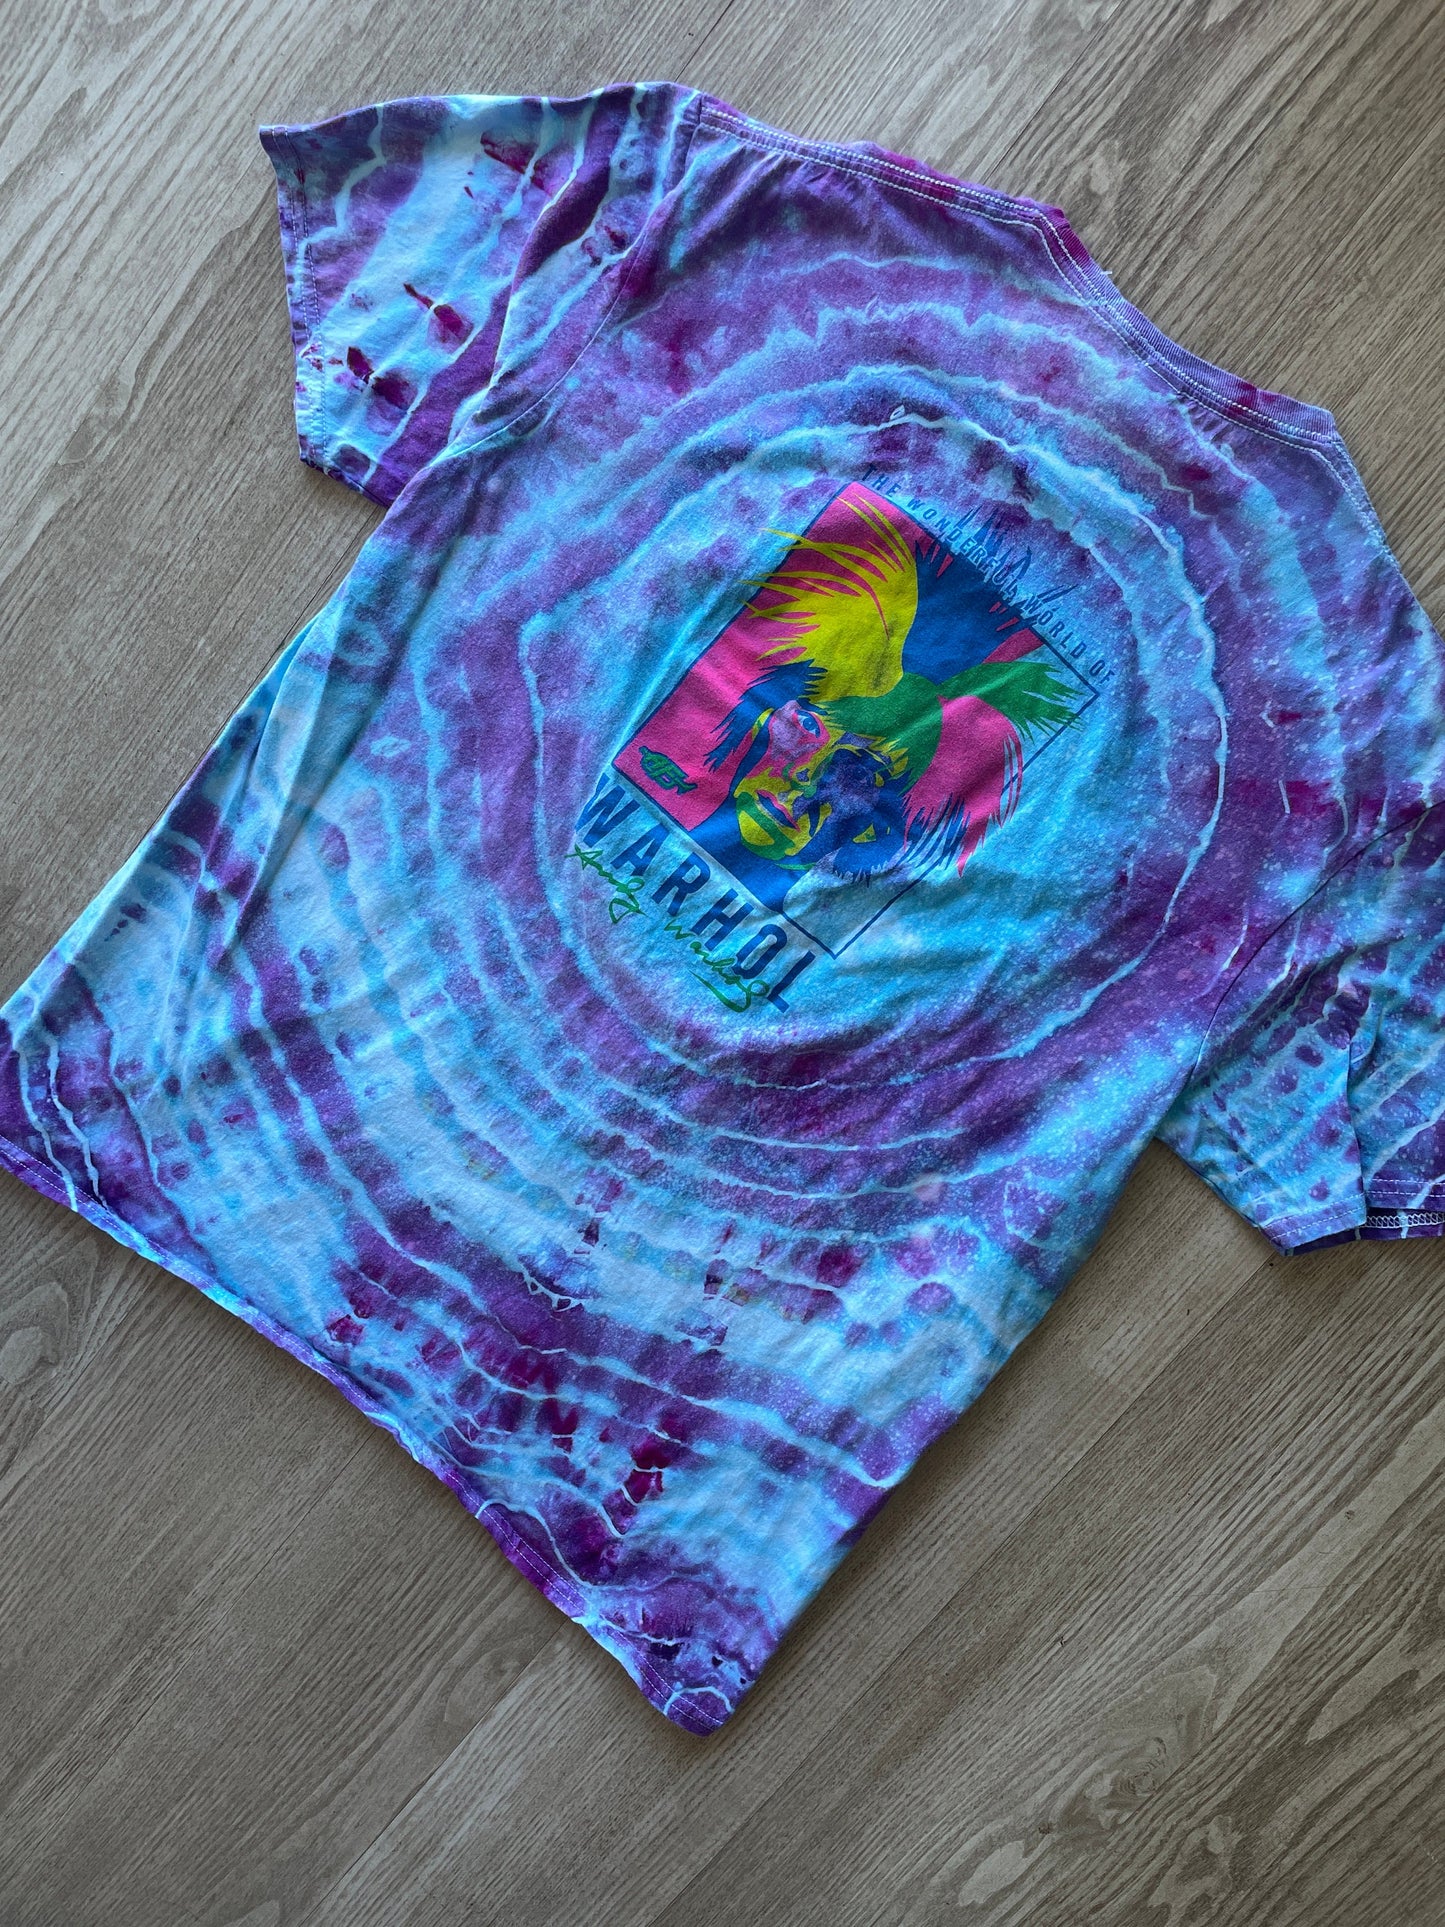 XL Men’s Wonderful World of Warhol Handmade Tie Dye Short Sleeve T-Shirt | One-Of-a-Kind Upcycled Pink and Purple Galaxy Ice Dye Geode Top